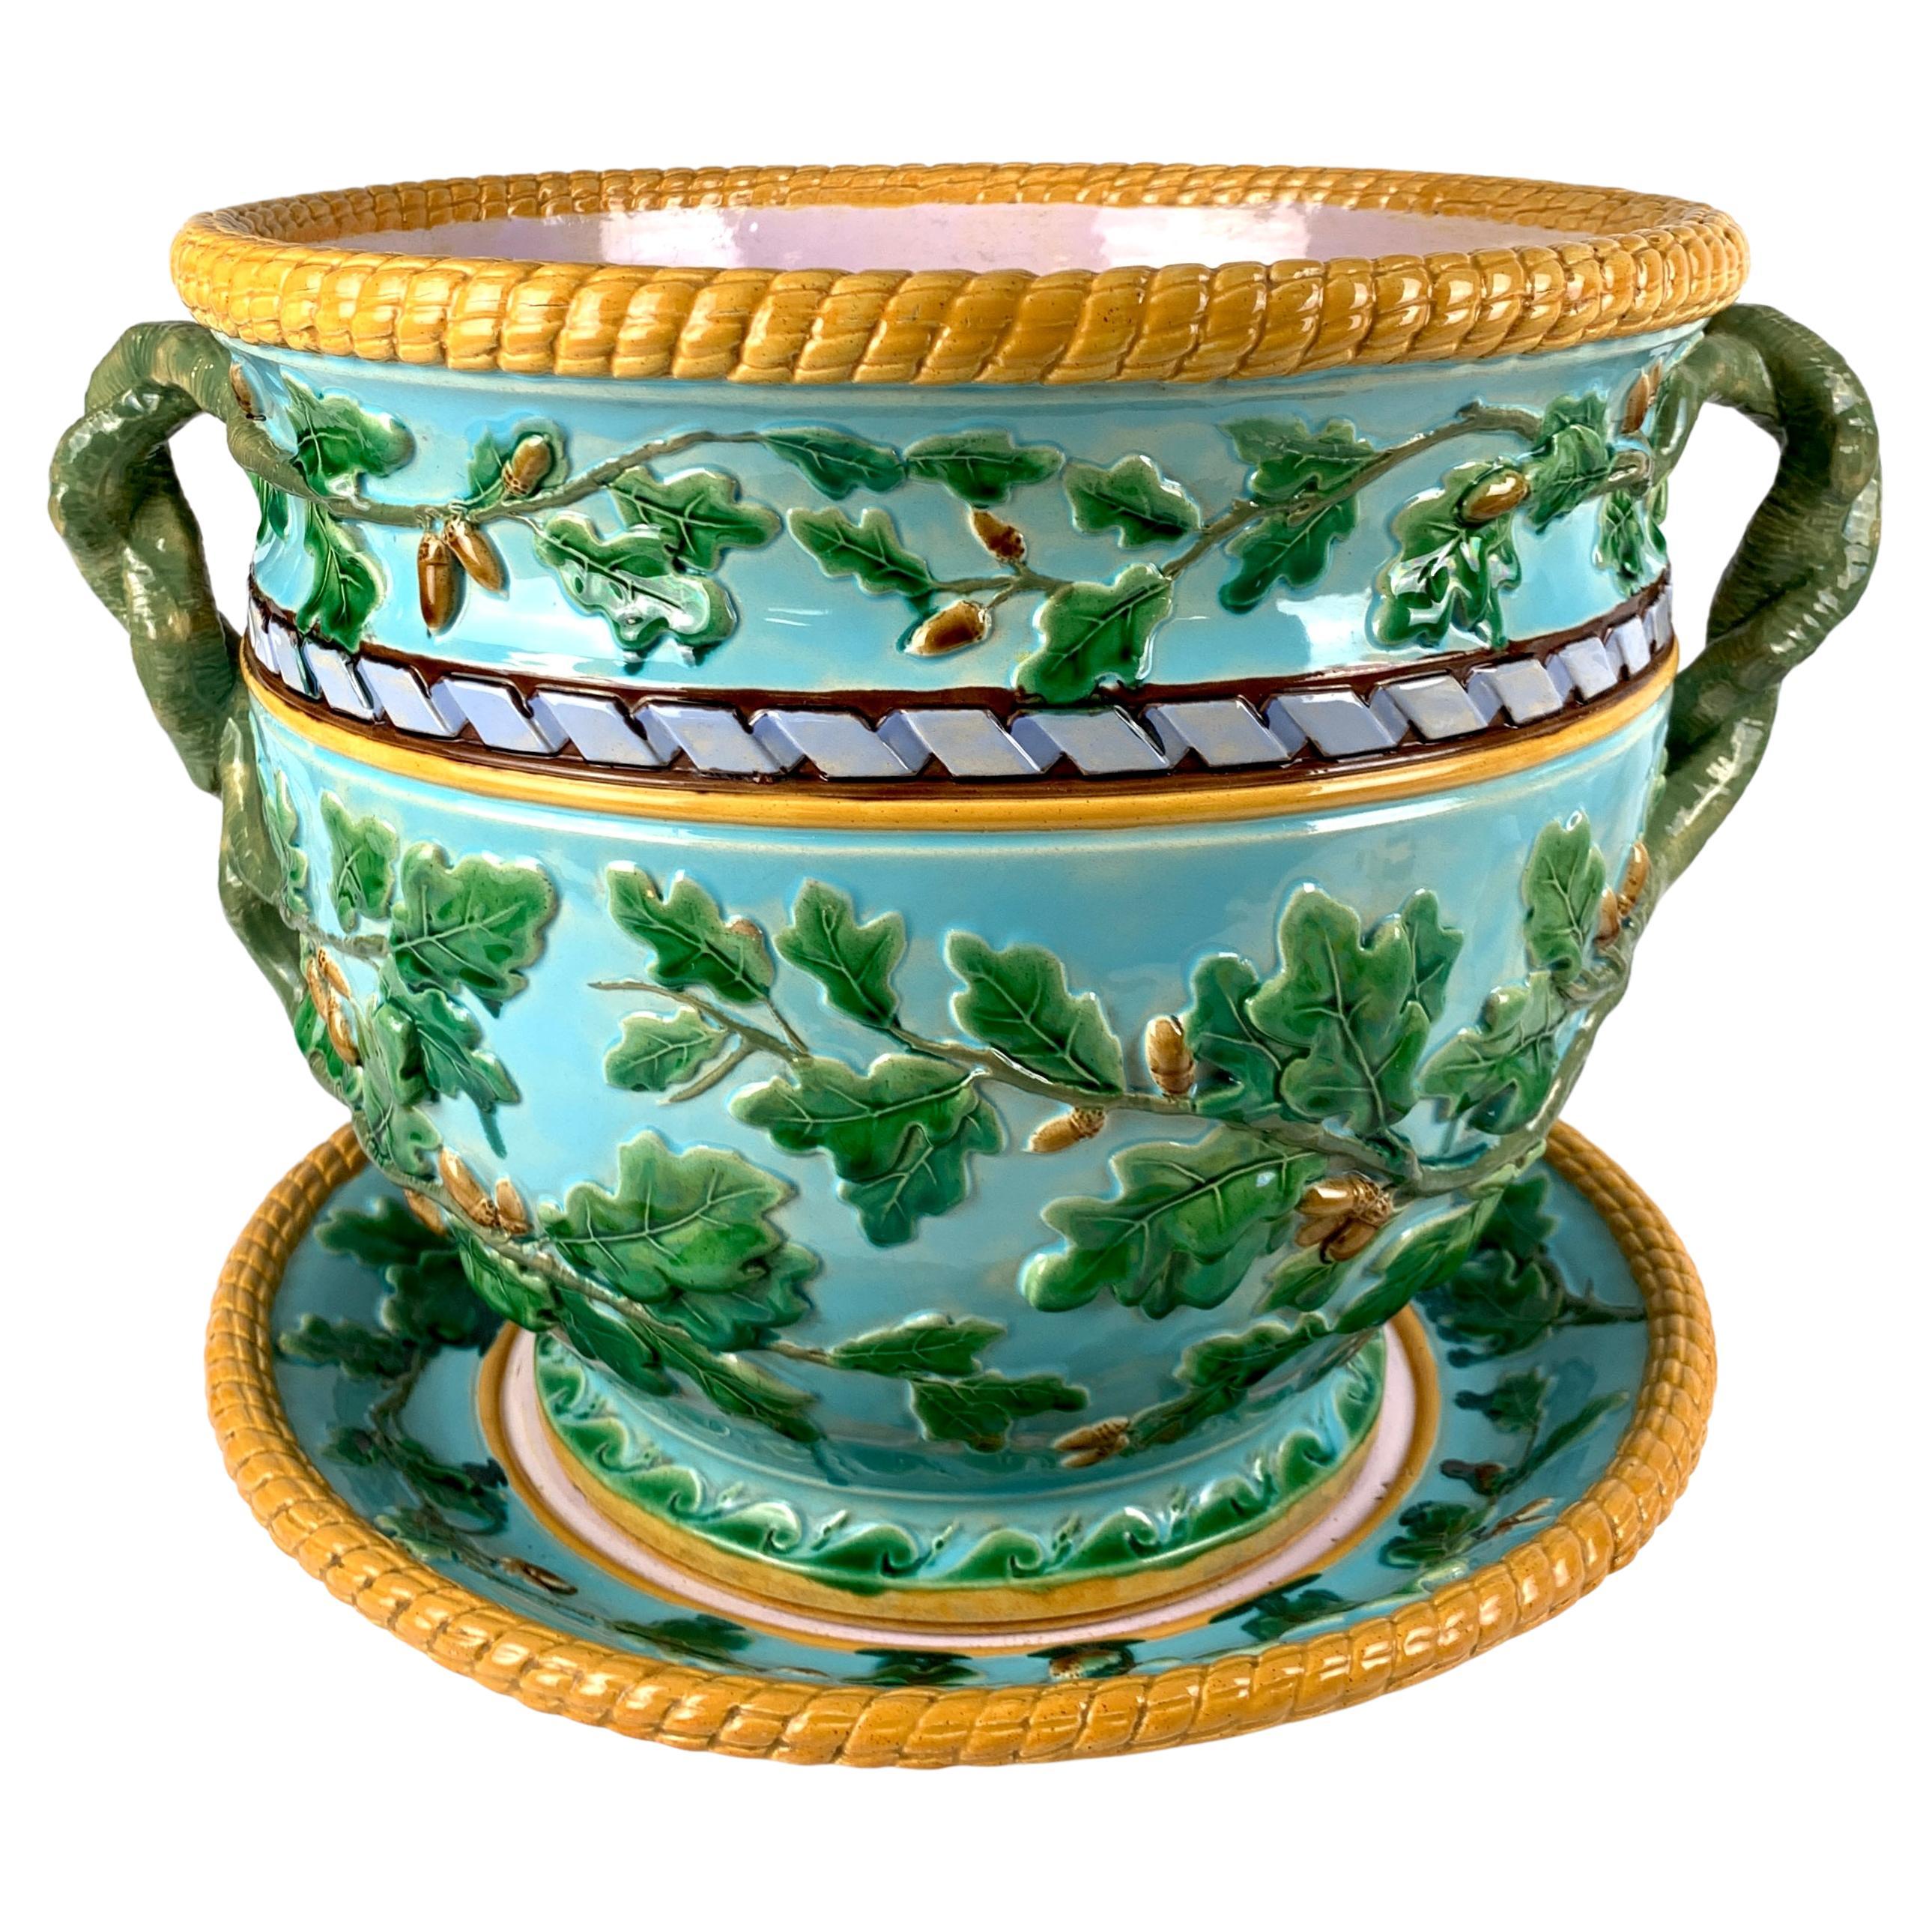 Large Antique Majolica Planter Made Circa 1880 Turquoise Ground & Green Leaves For Sale